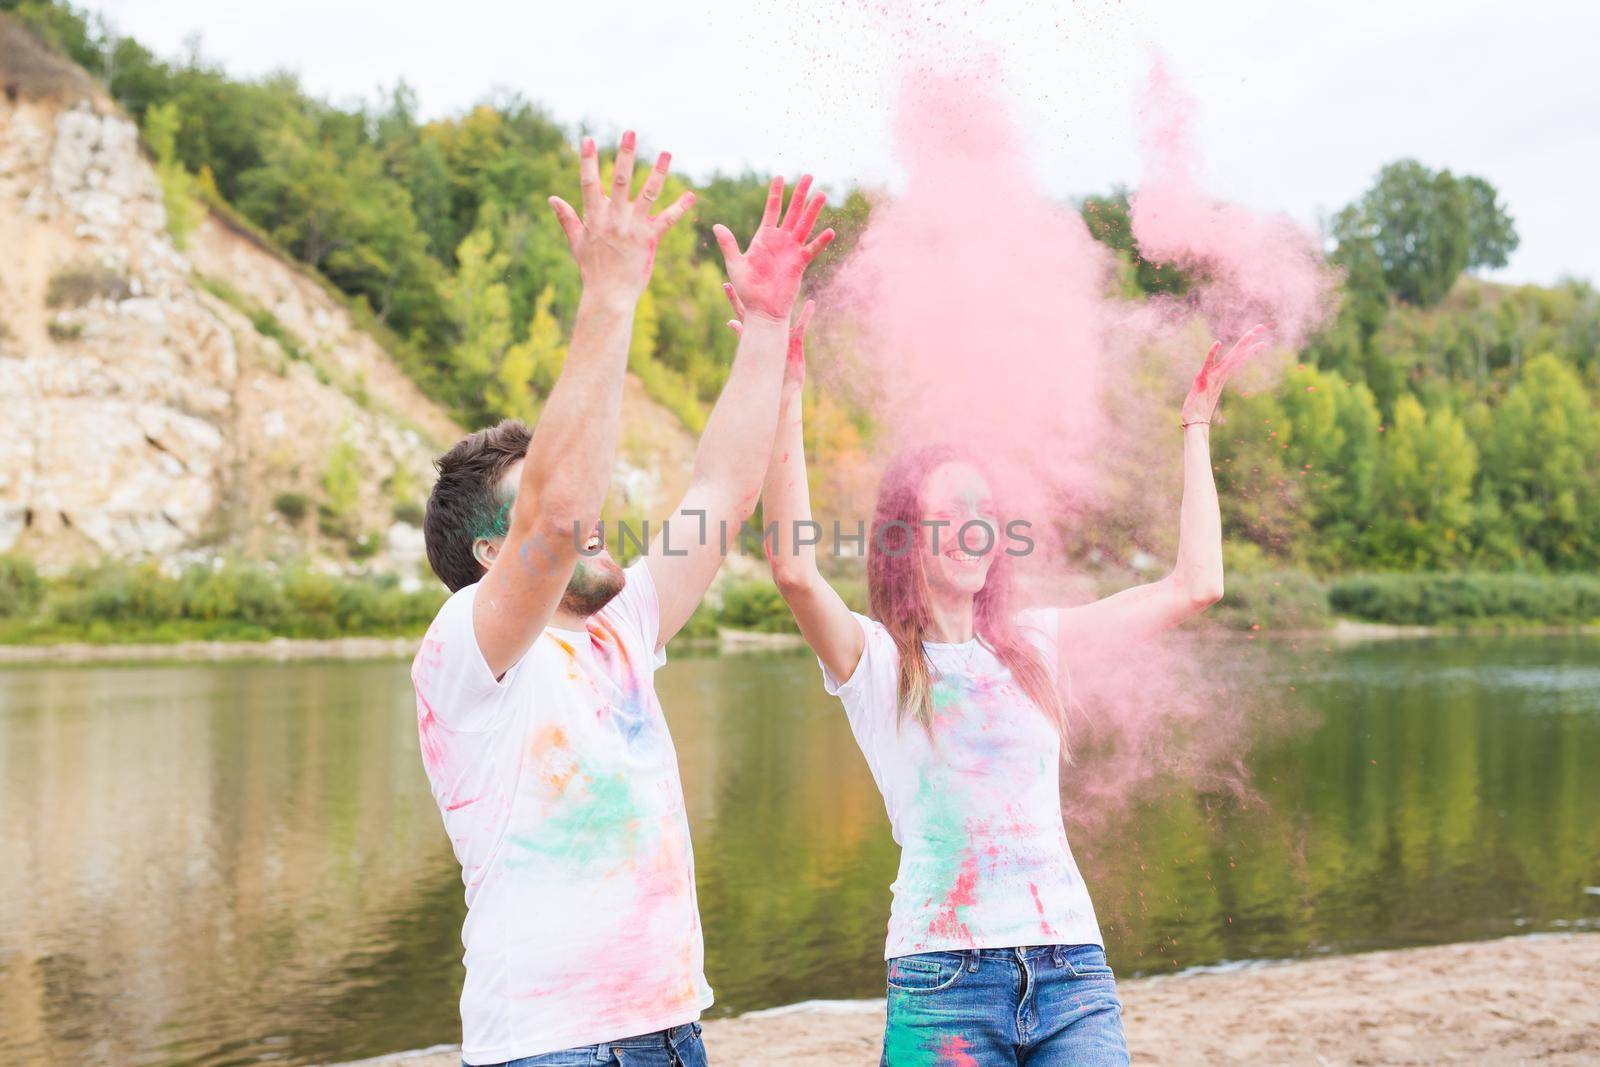 Festival holi, holidays, tourism and nature concept - Couple dressed in white shirts playing with colorful dust.